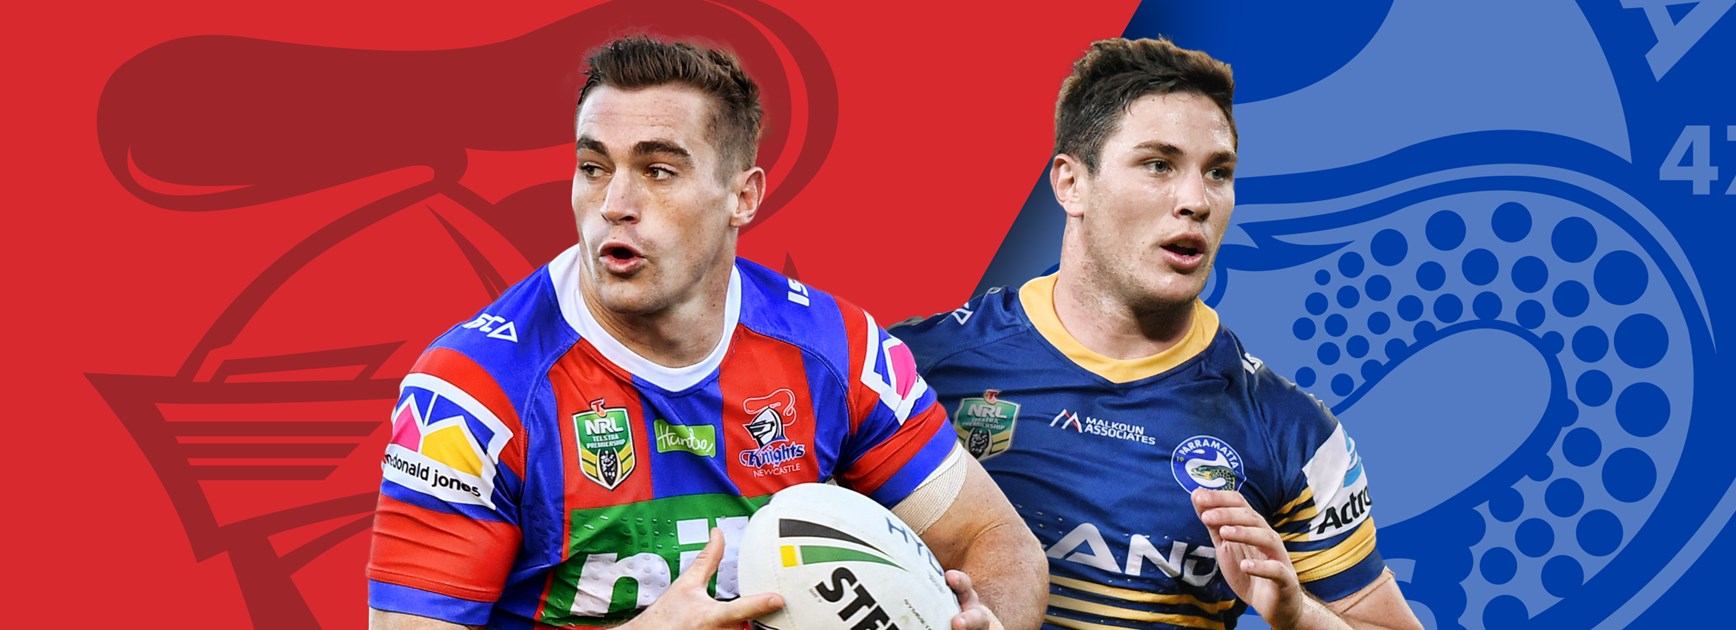 Knights v Eels, Round 18 Match Preview